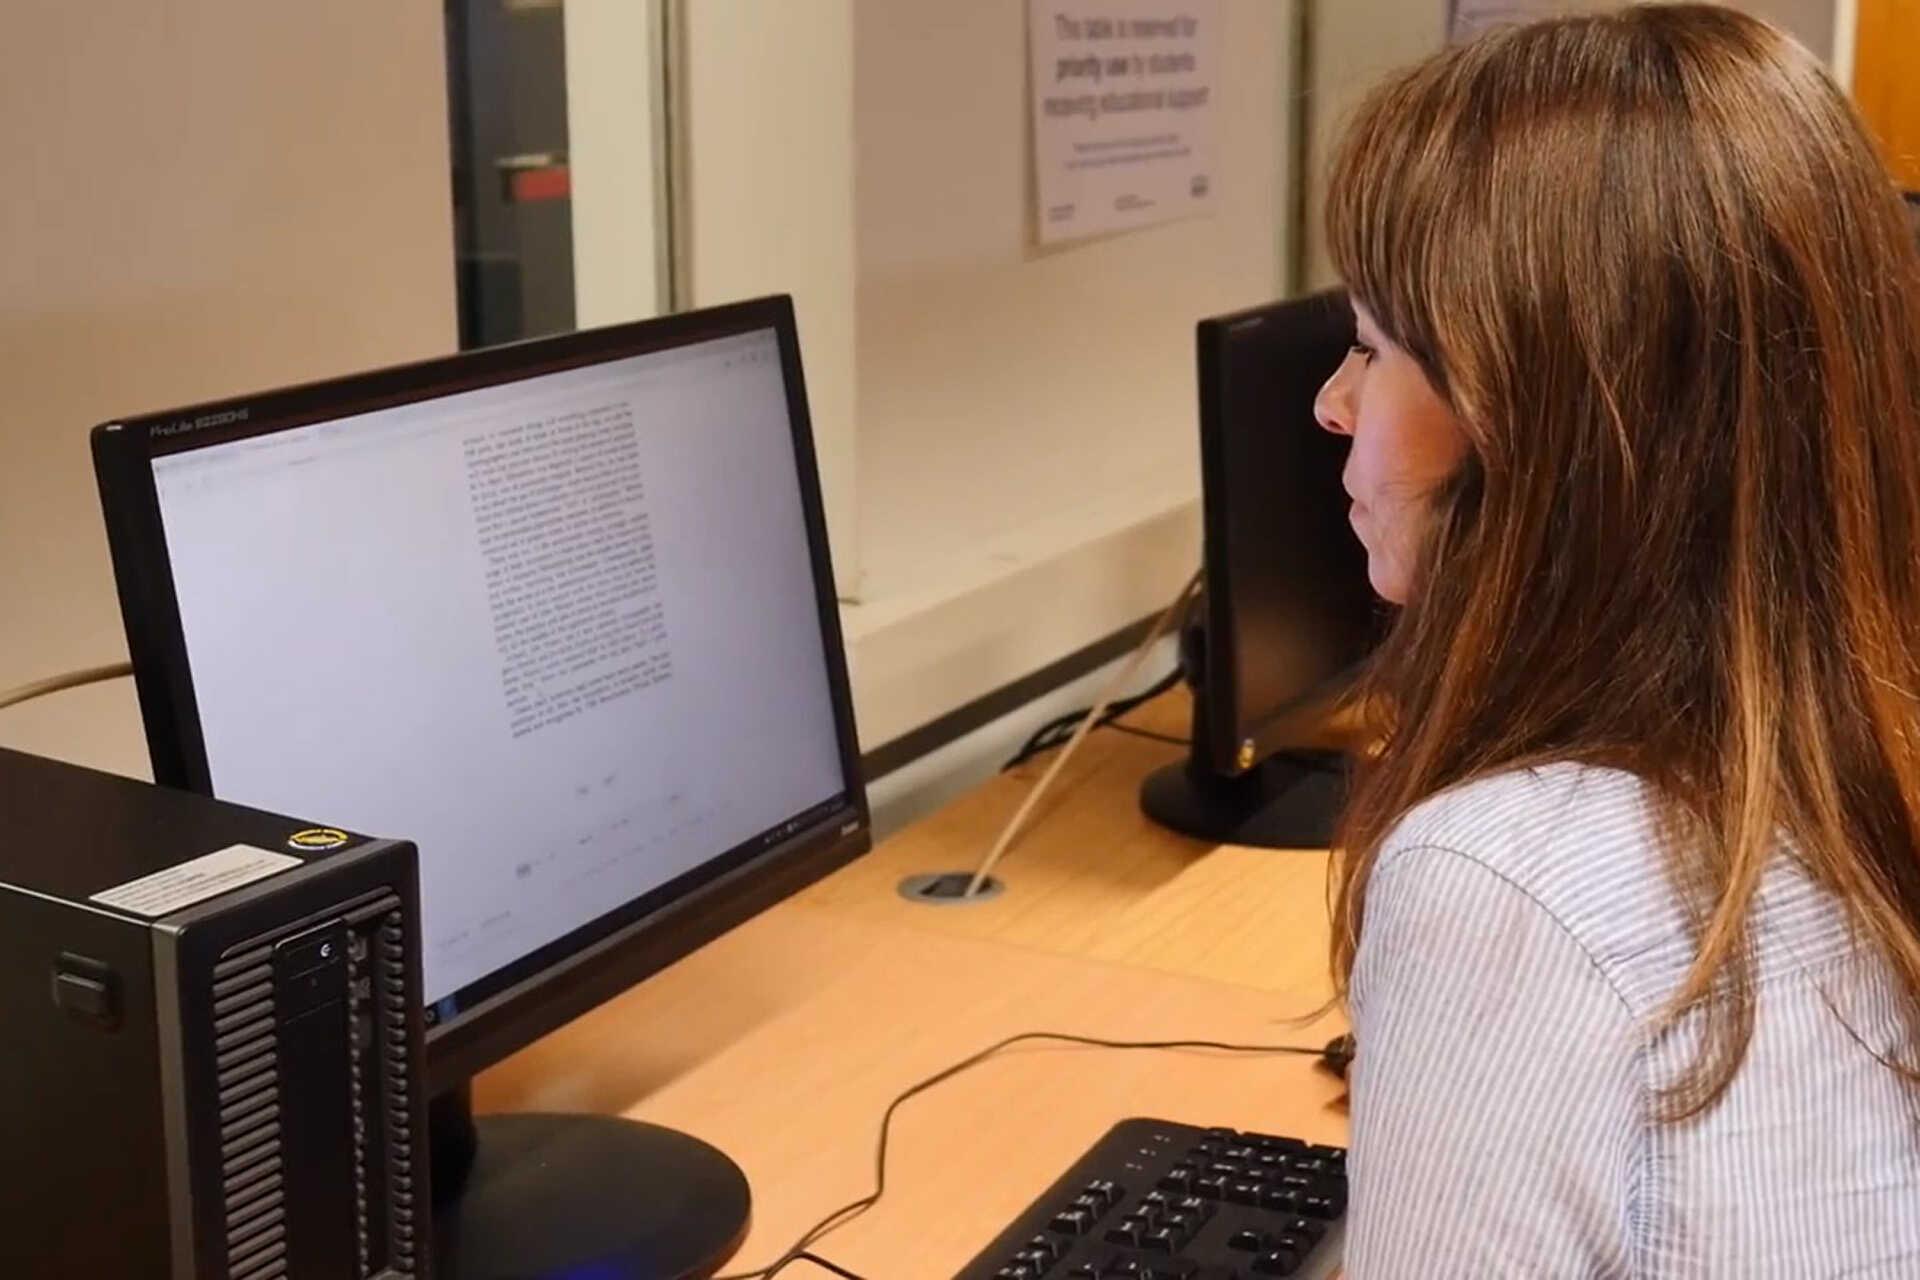 Mature student Kate works on a computer at the University of Kent